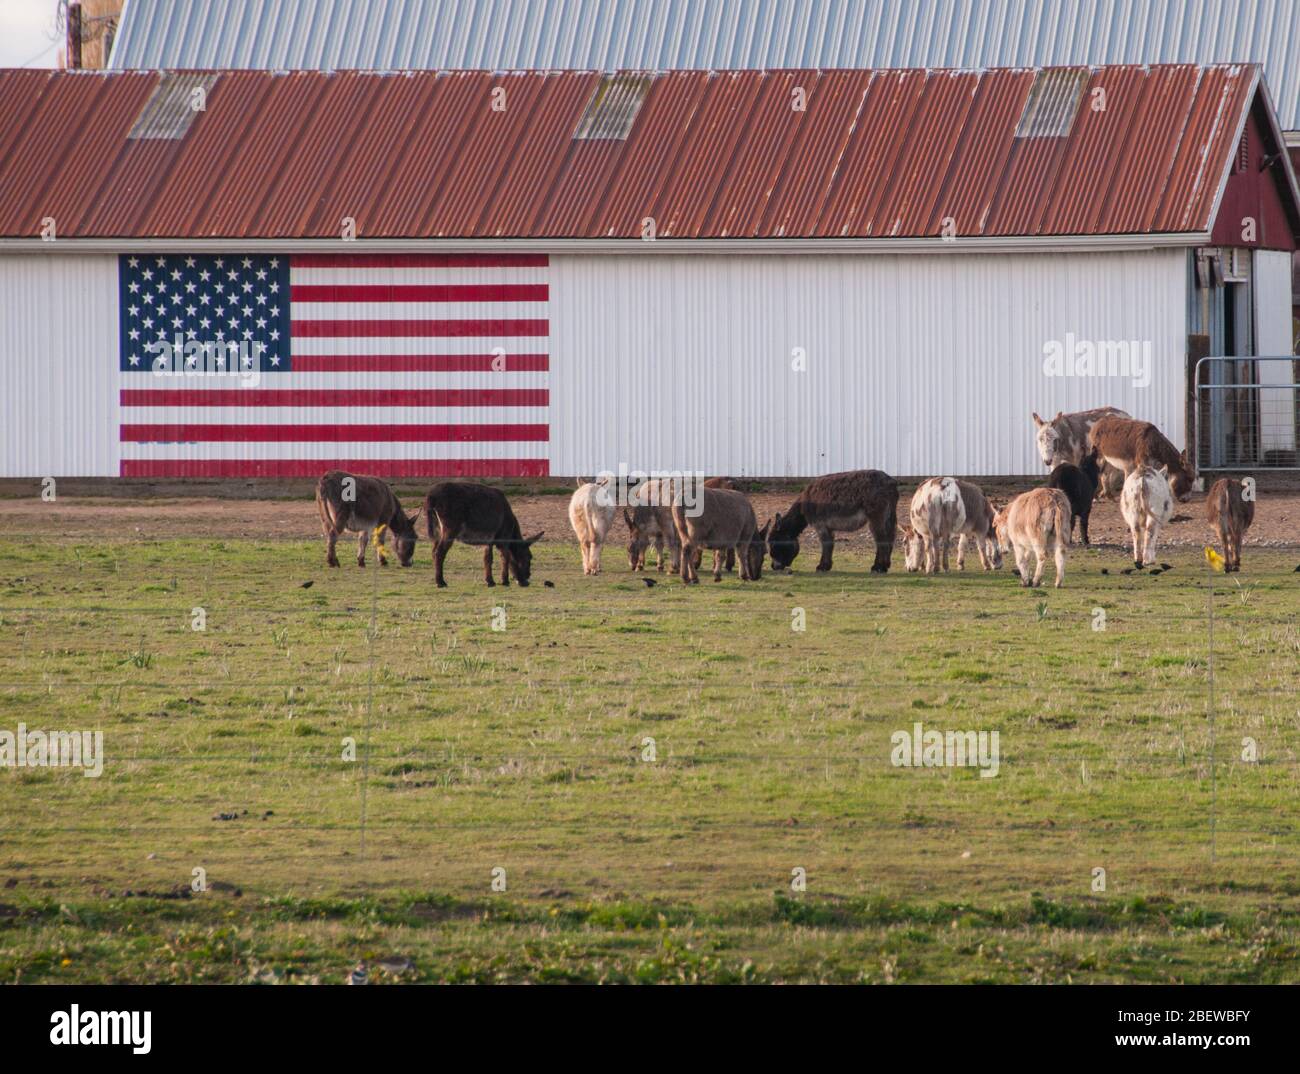 The American flag  painted on a white barn with cows in the foreground Stock Photo